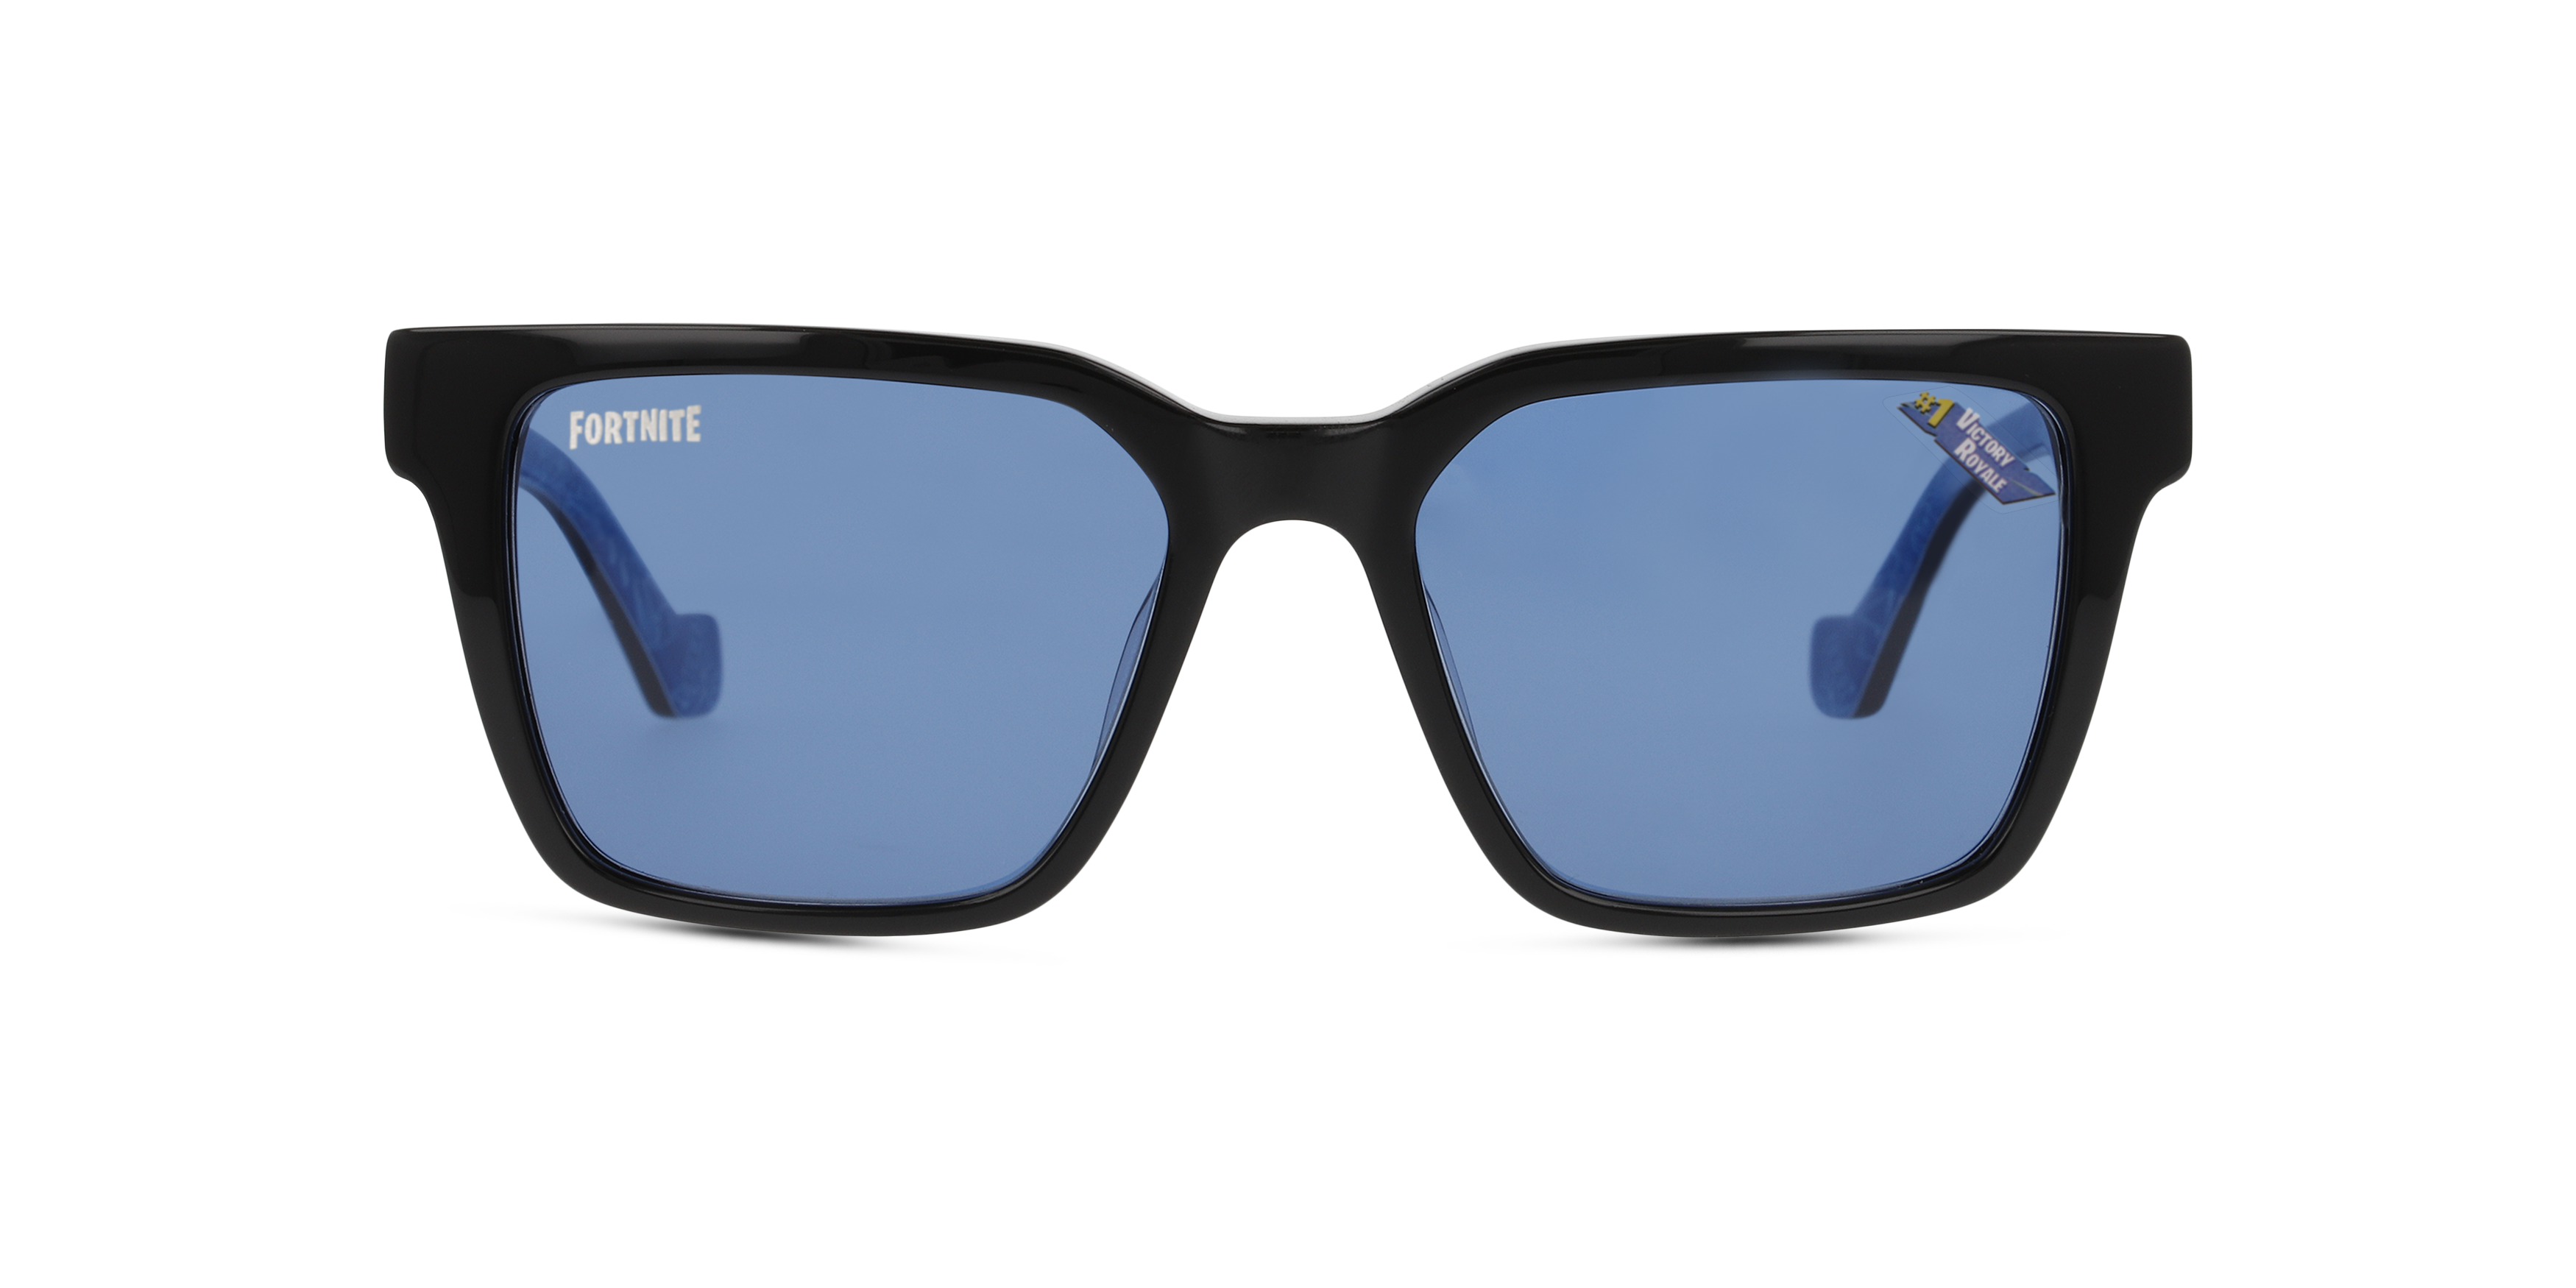 Front Fortnite with Unofficial UNSU0128 (BXL0) Sunglasses Blue / Black